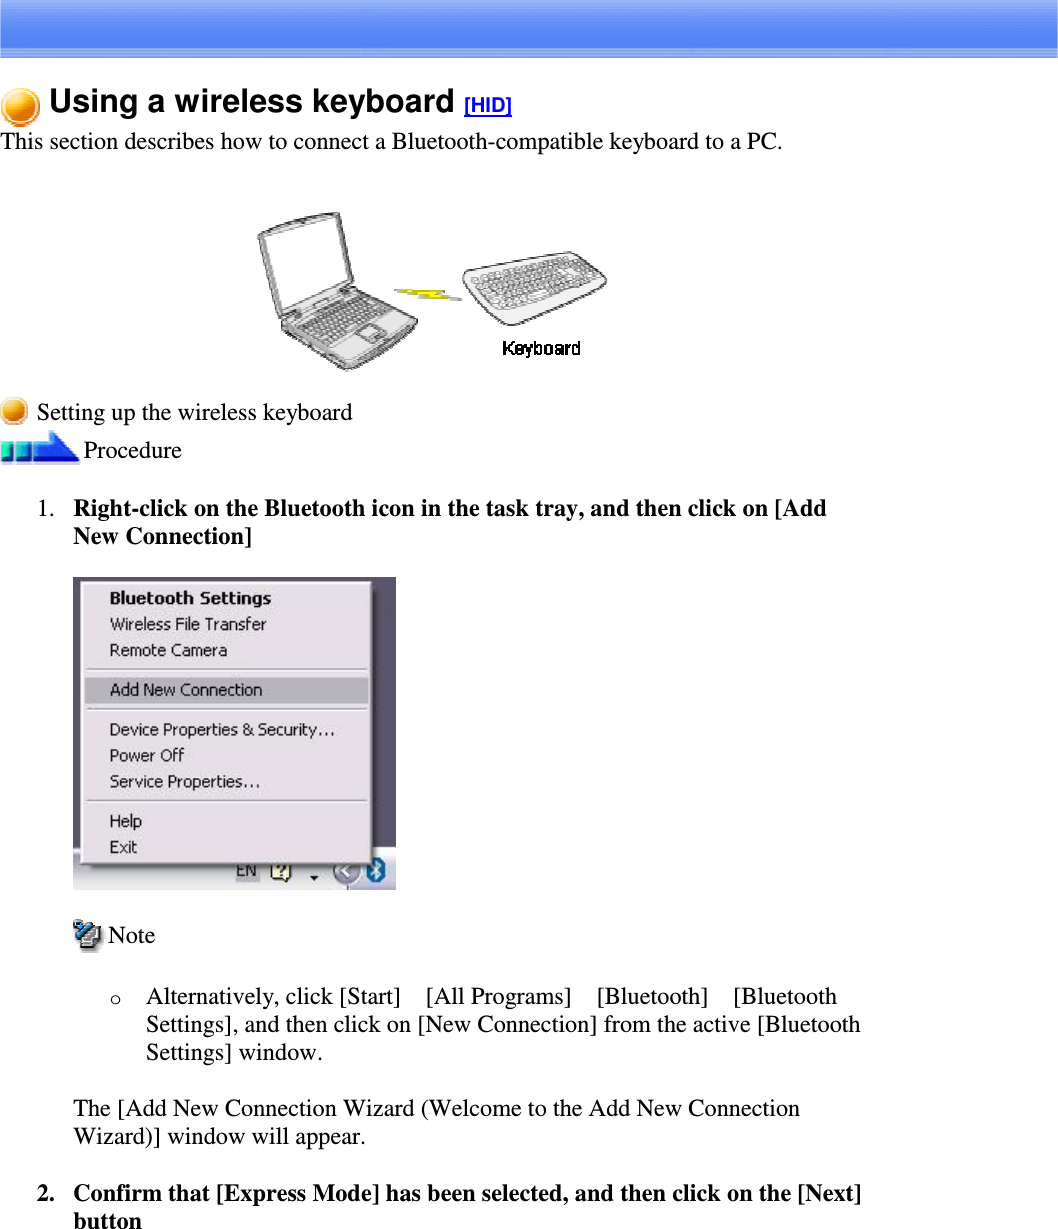 Using a wireless keyboard [HID]This section describes how to connect a Bluetooth-compatible keyboard to a PC.Setting up the wireless keyboardProcedure1. Right-clickontheBluetoothiconinthetasktray,andthenclickon[AddNew Connection]NoteoAlternatively, click [Start][All Programs][Bluetooth][BluetoothSettings], and then click on [New Connection] from the active [BluetoothSettings] window.The [Add New Connection Wizard (Welcome to the Add New ConnectionWizard)] window will appear.2. Confirm that [Express Mode] has been selected, and then click on the [Next]button